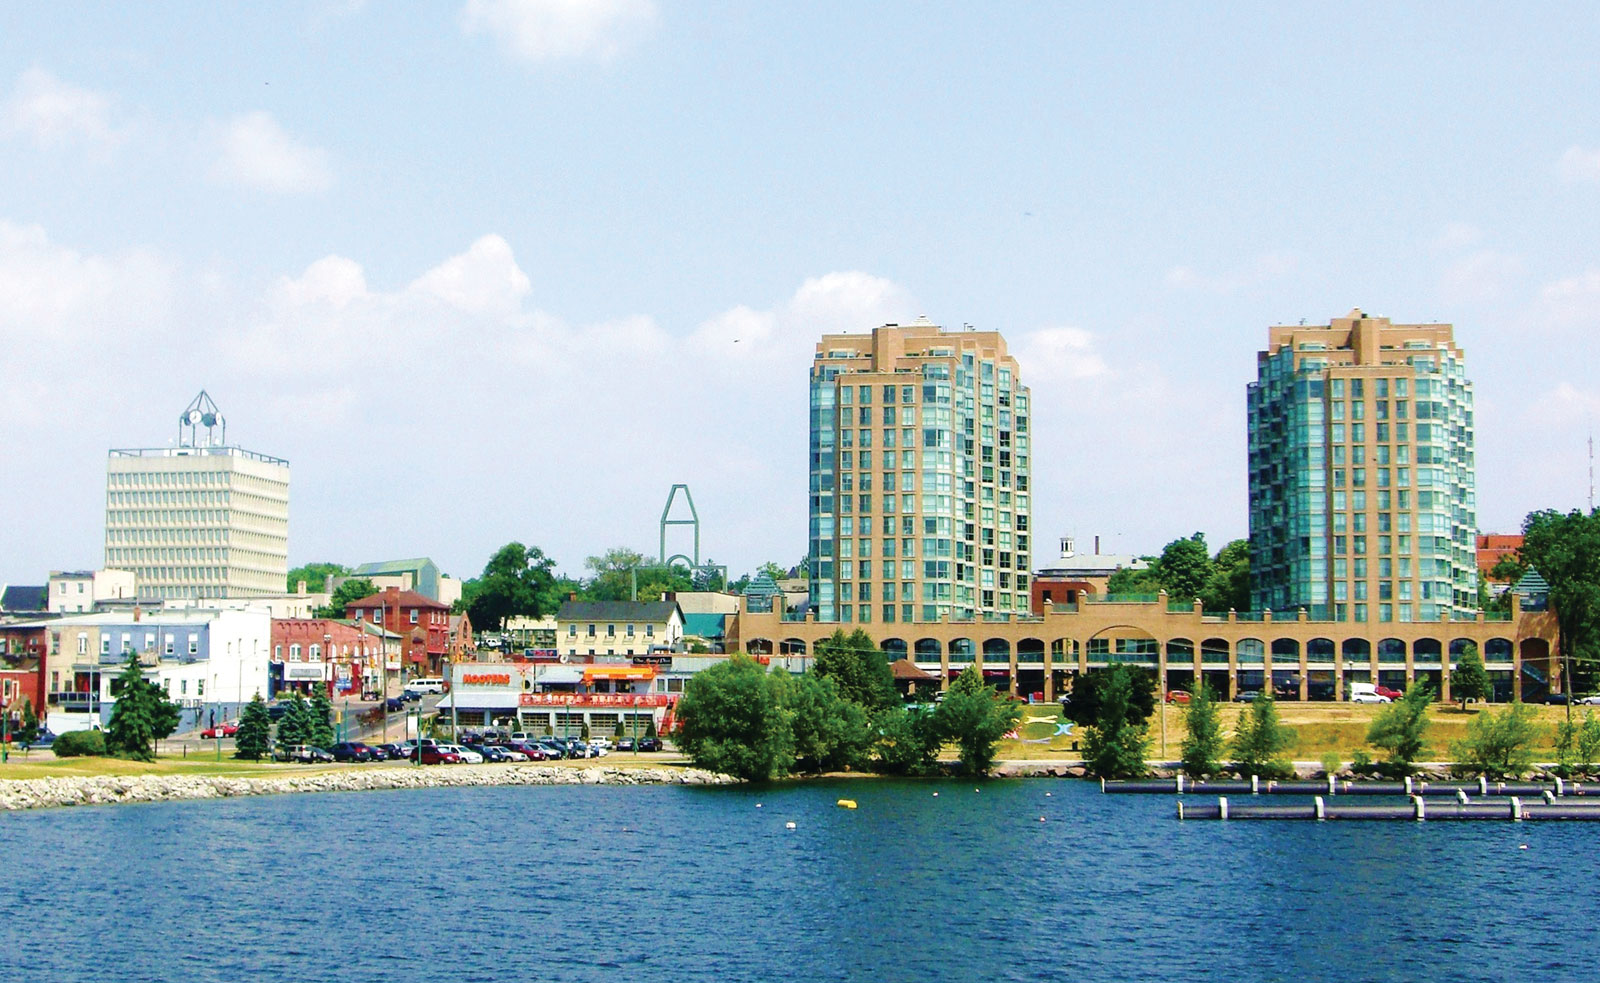 5 Things to Do in Barrie